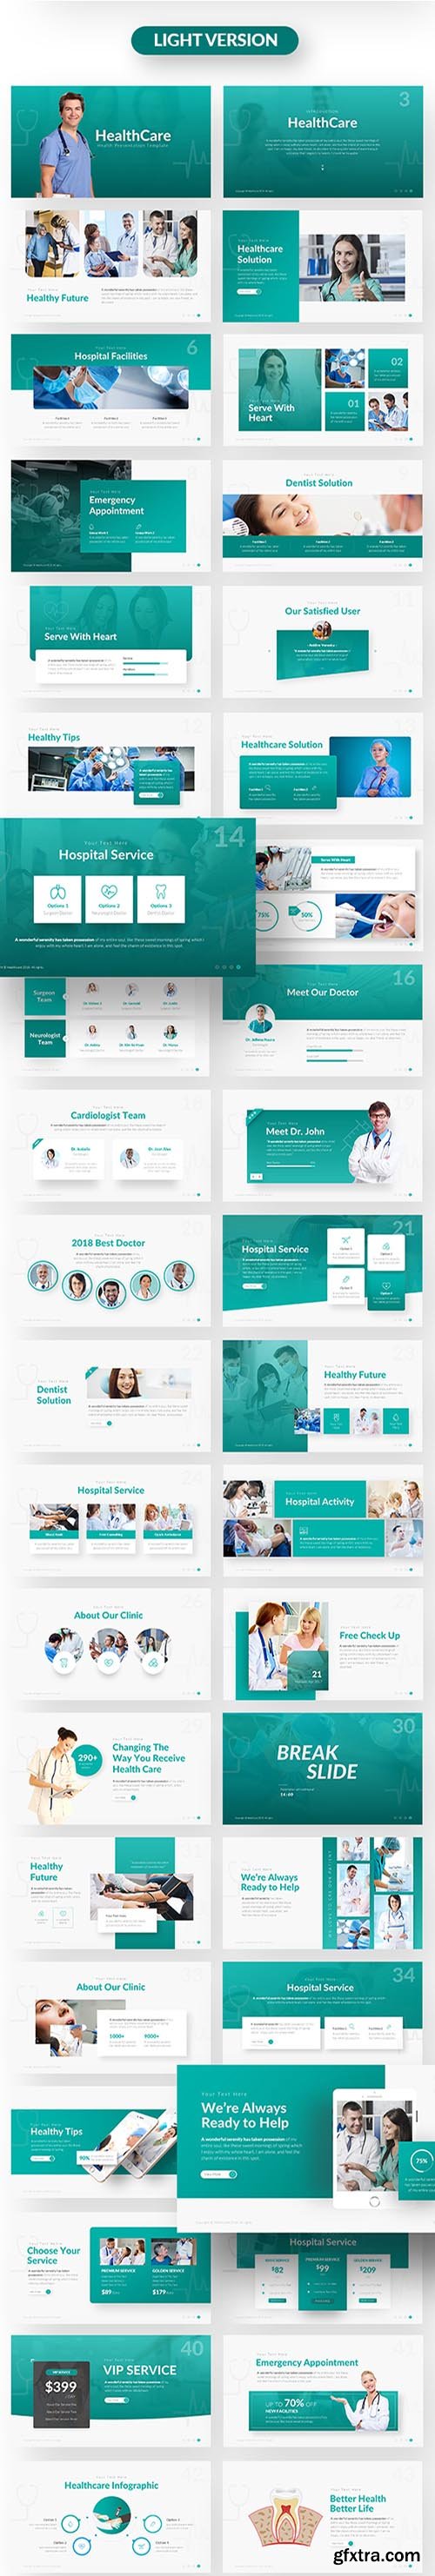 HealthCare Medical PowerPoint Presentation Template 22272749